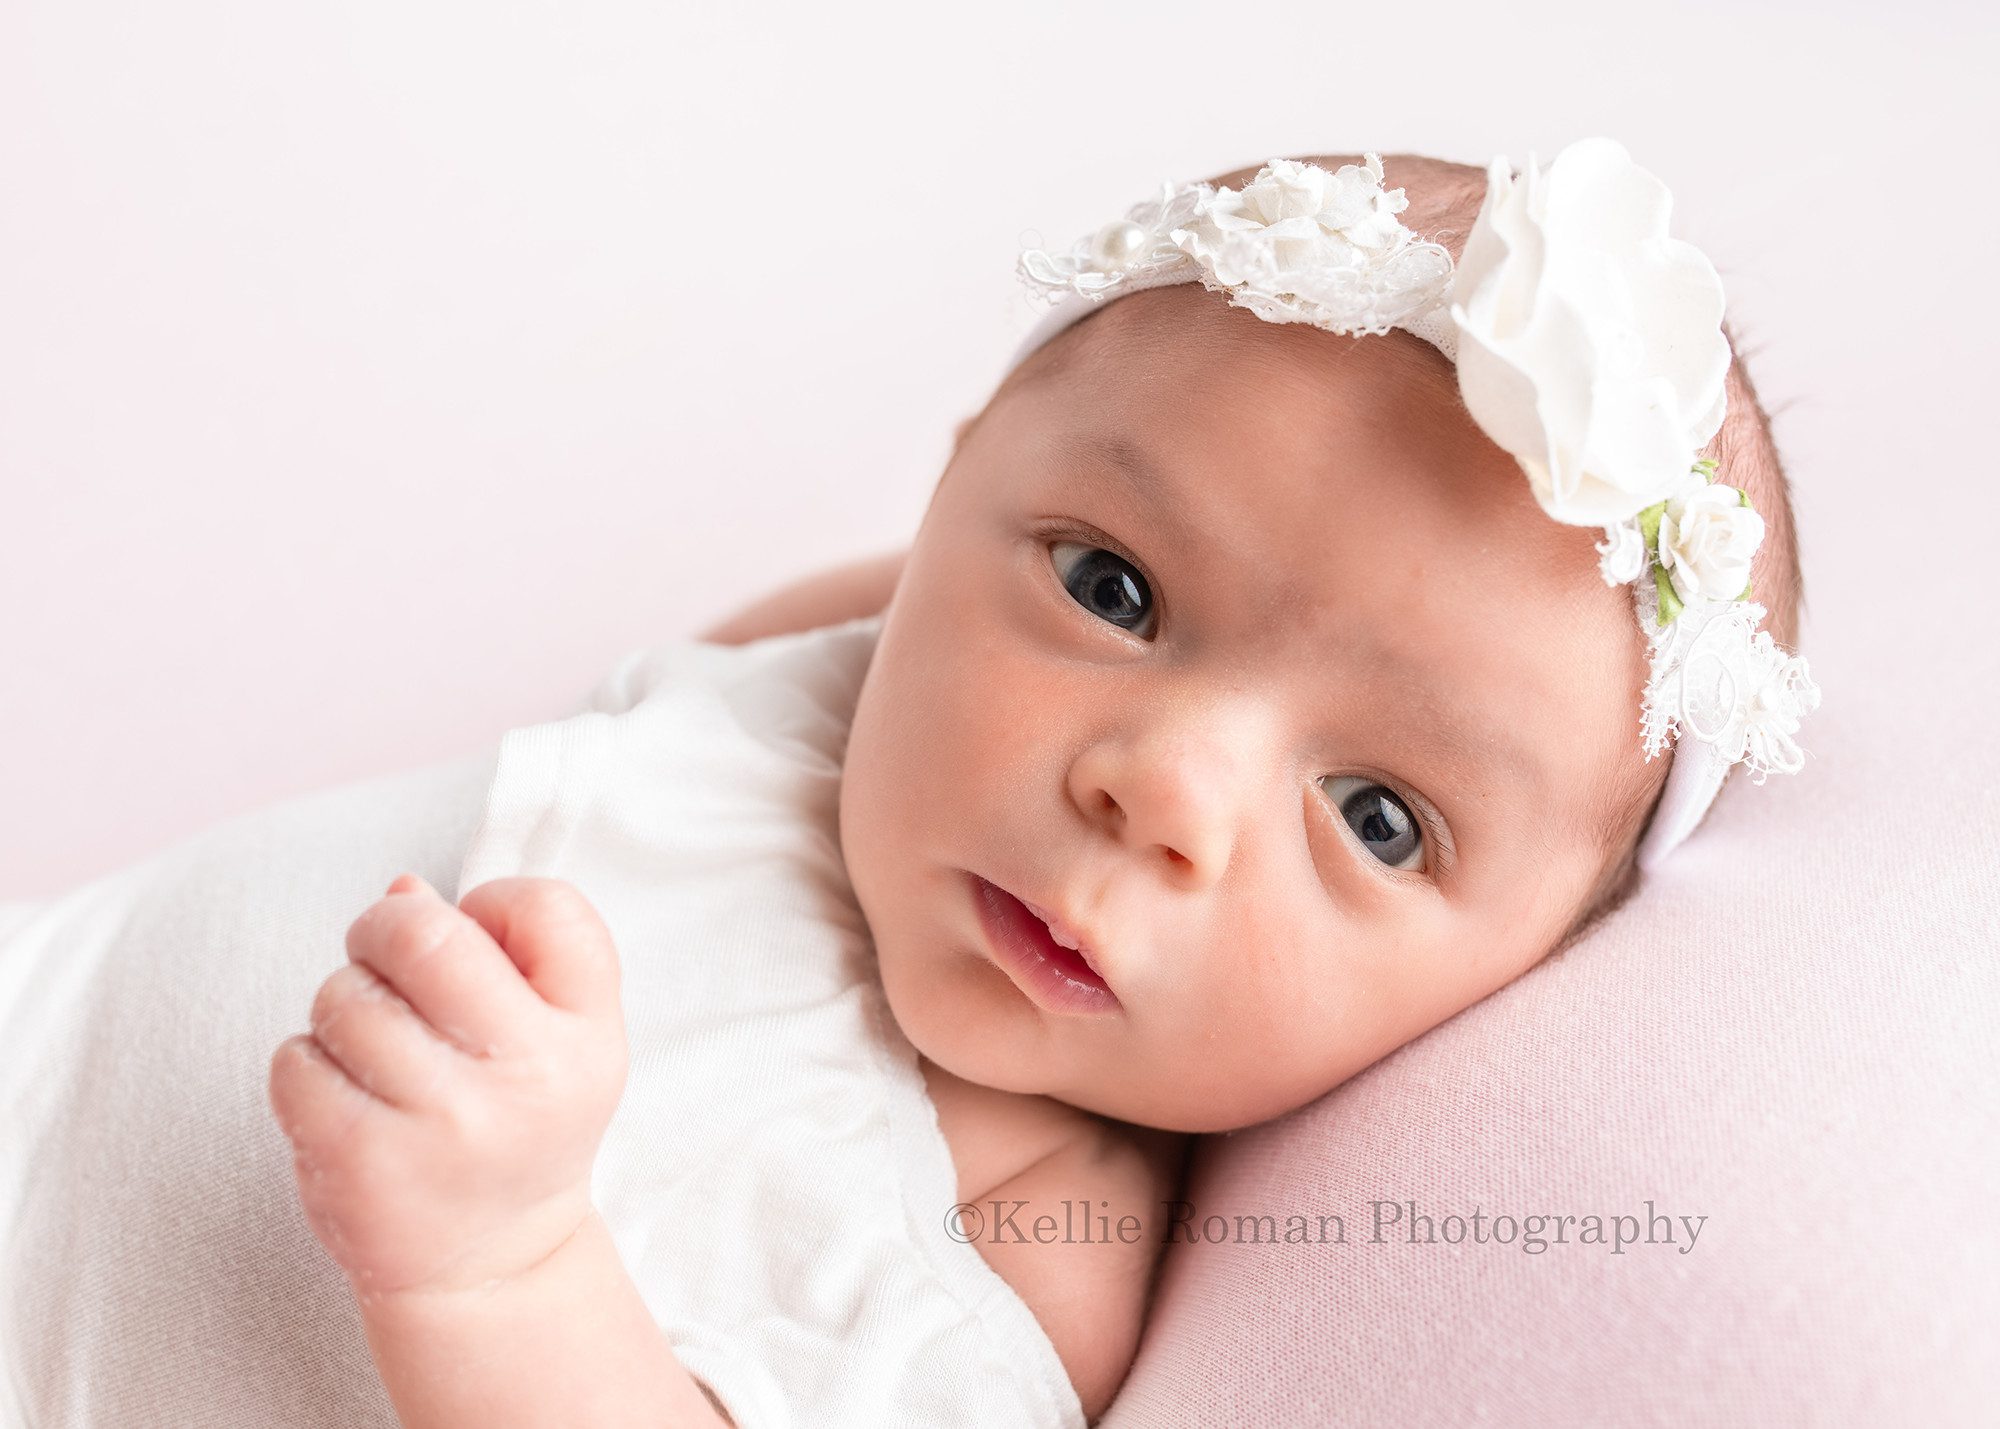 milwaukee studio newborn photographer. An infant baby girl is in a milwaukee photographers studio located in greendale Wisconsin. The baby girl is laying on her back with a white romper on and a white floral headband. she's on top of pink posing fabric, and is looking right into the lens of the camera